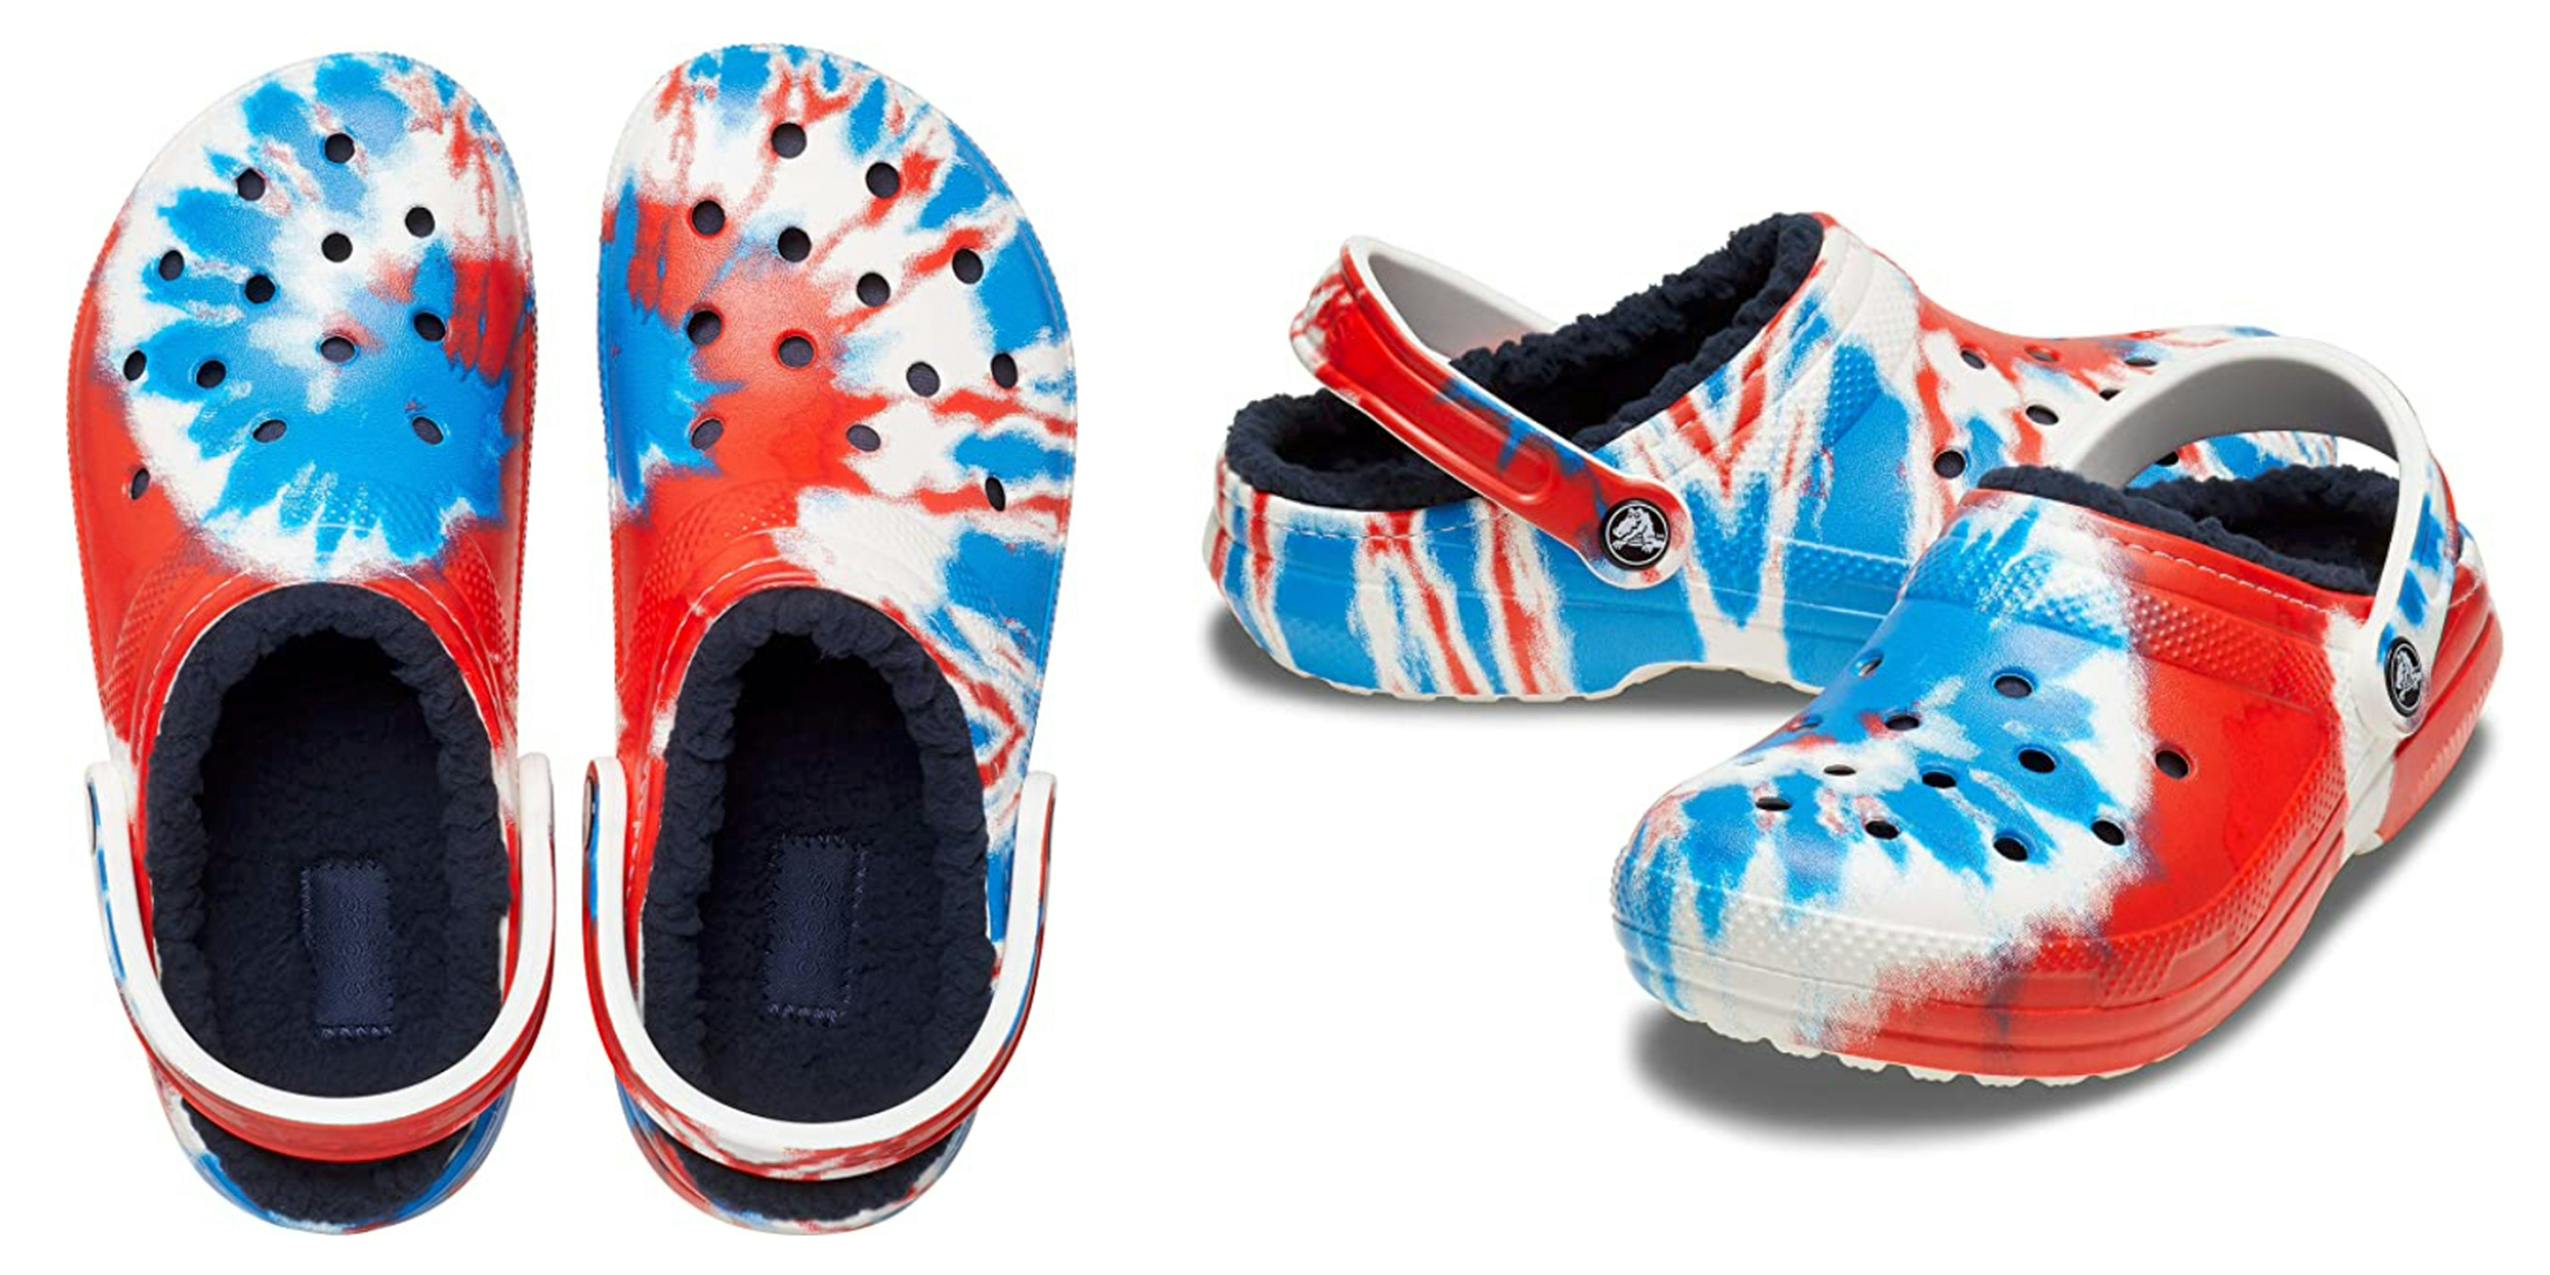 Warm and Fuzzy lined Croc shows in red, white, and blue tye die colors.